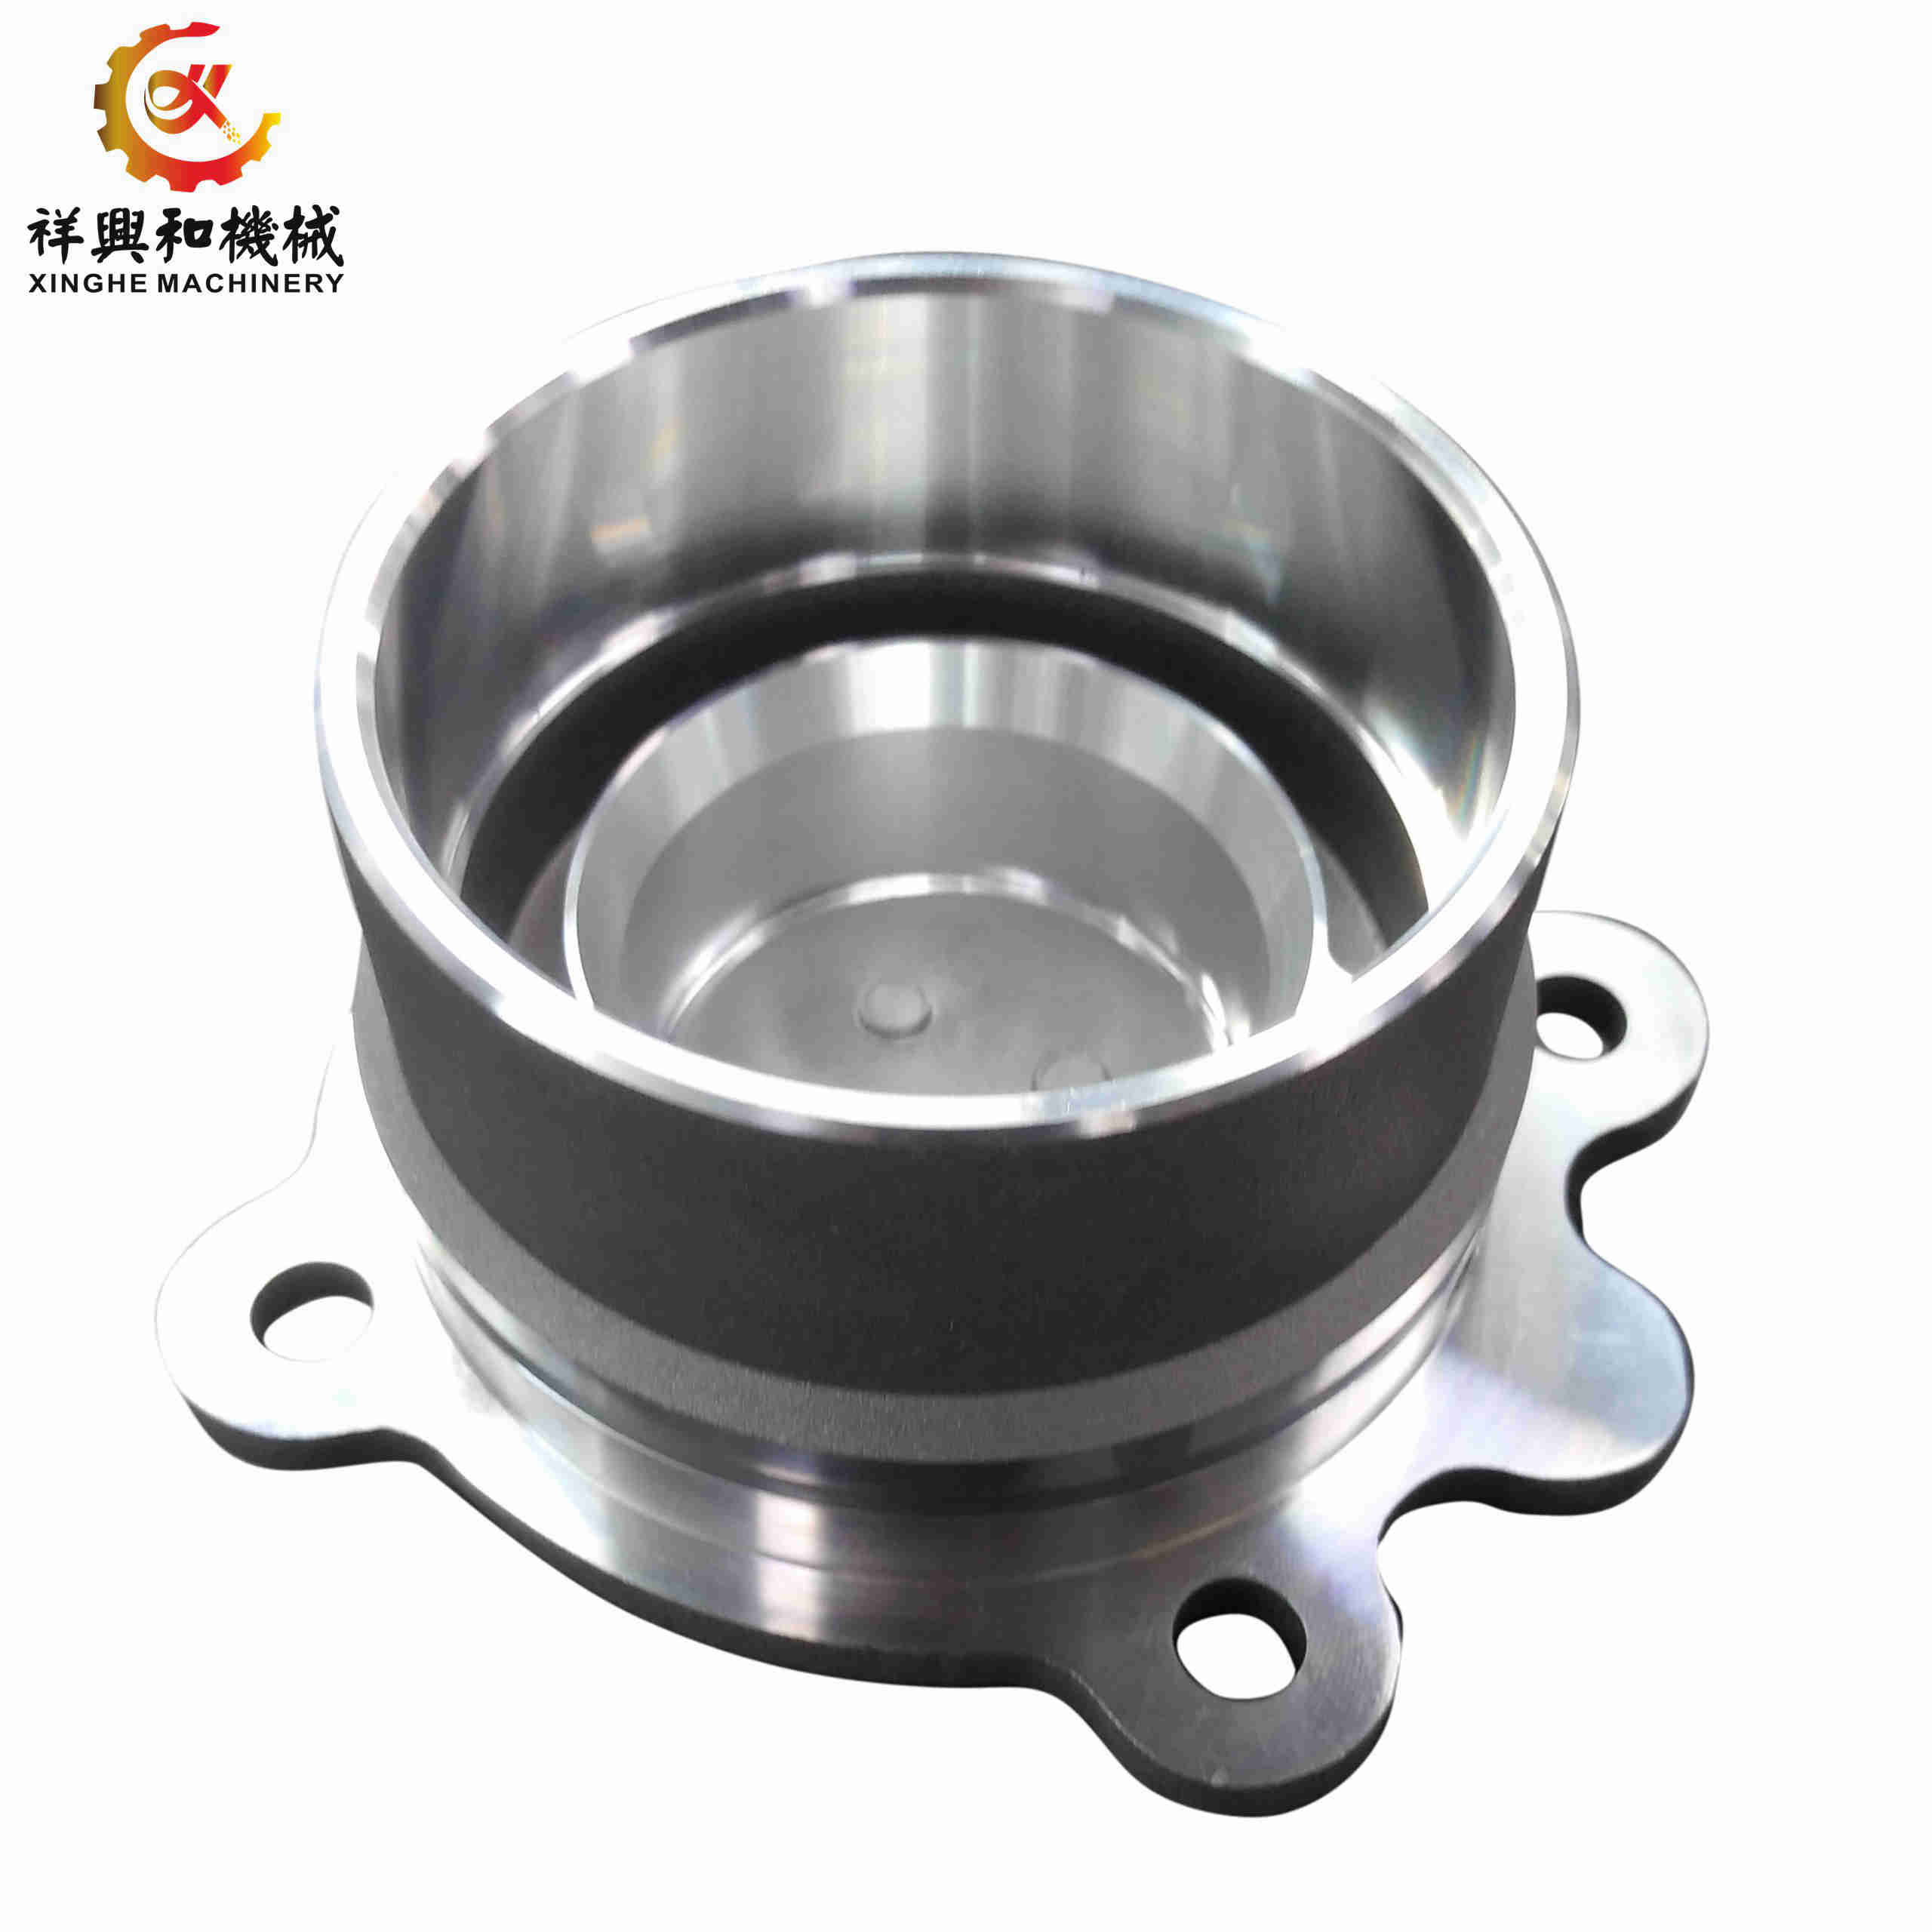 ADC12 A380 aluminum high pressure die casting products with cnc machining